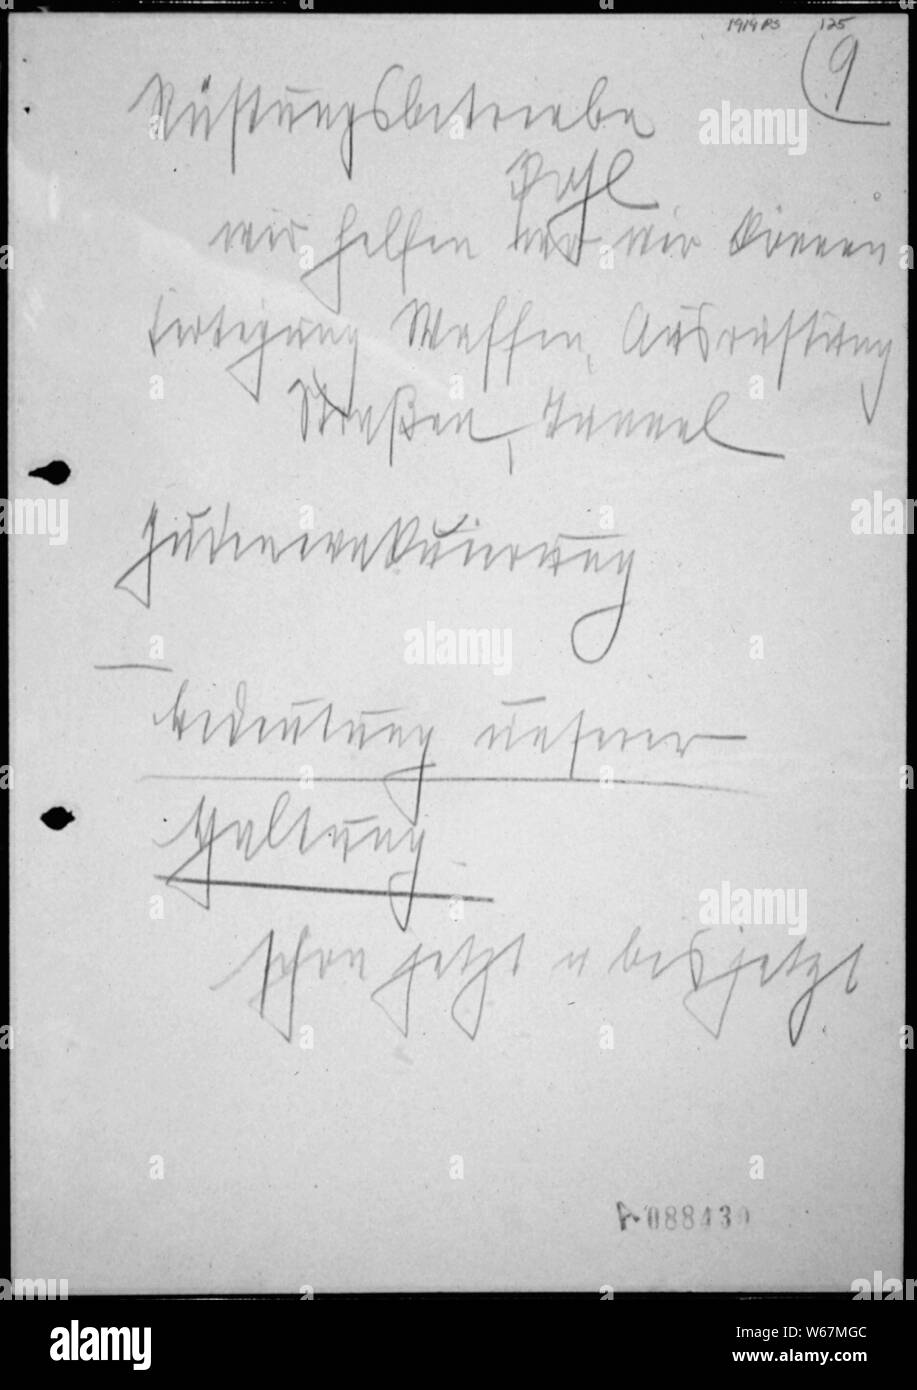 Notes of Heinrich Himmler, Chief of Nazi Guard (SS), for a Speech to SS Generals; Scope and content:  Heinrich Himmler was responsible for overseeing the implementation of the final solution. In a speech to 100 SS generals, he spoke of the extermination of Jews. This handwritten note uses the euphemism Judenevakuierung meaning evacuation of the Jews. However, in sound recordings of the speech, Himmler defined evacuation as extermination. General notes:  Exhibit 170 submitted to the Tribunal by the United States. Exhibit History: American Originals, December 1996 - December 1997, National Archi Stock Photo